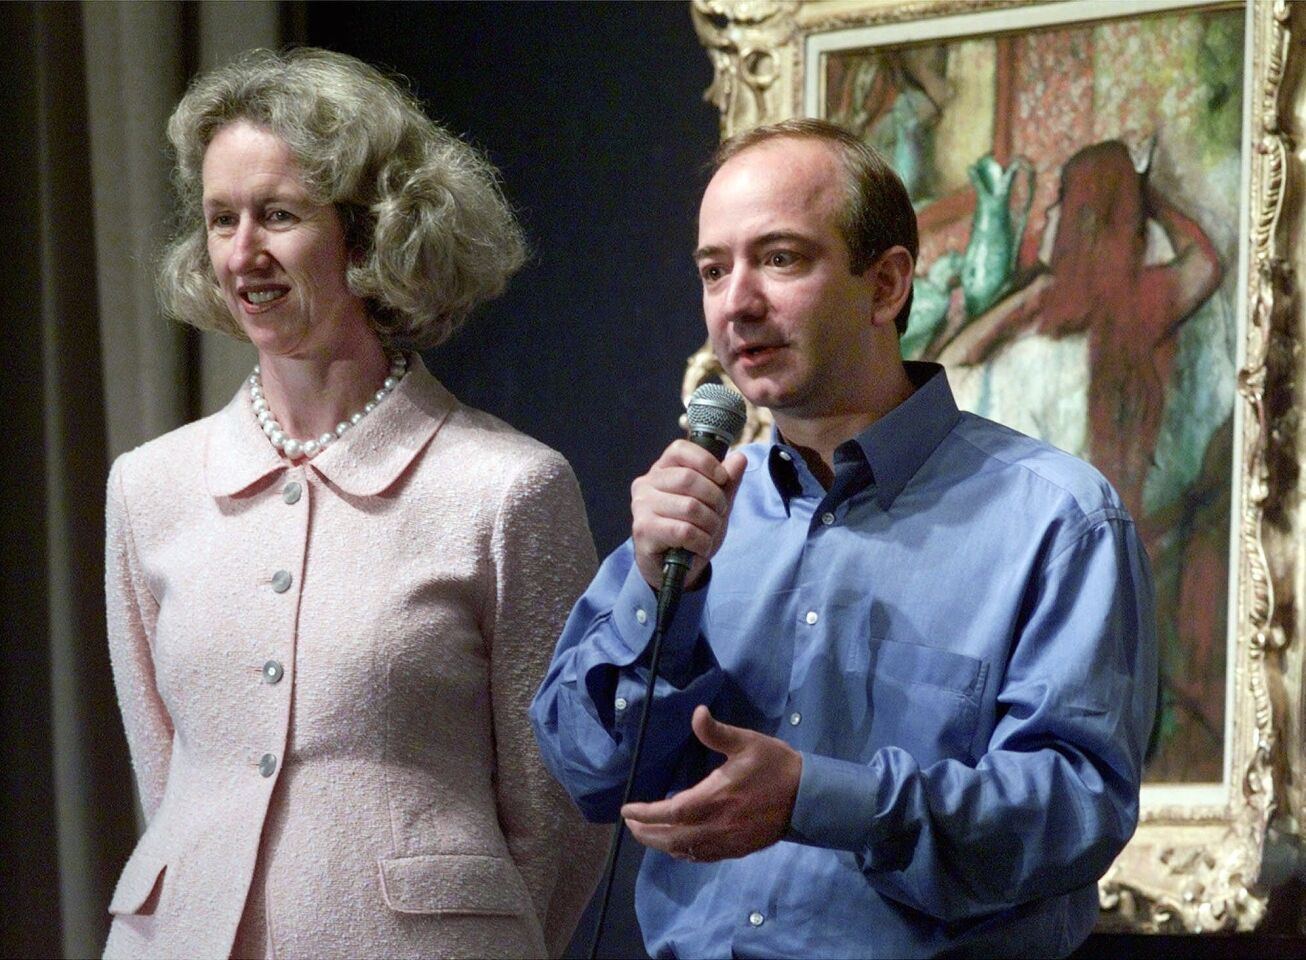 Diana Brooks, left, president and CEO of Sotheby's, and Jeff Bezos, founder and CEO of Amazon.com, Inc., address a news conference at Sotheby's in New York, Wednesday June 16, 1999. Internet superstore Amazon.com invested about $45 million for a 1.7 percent stake in Sotheby's.